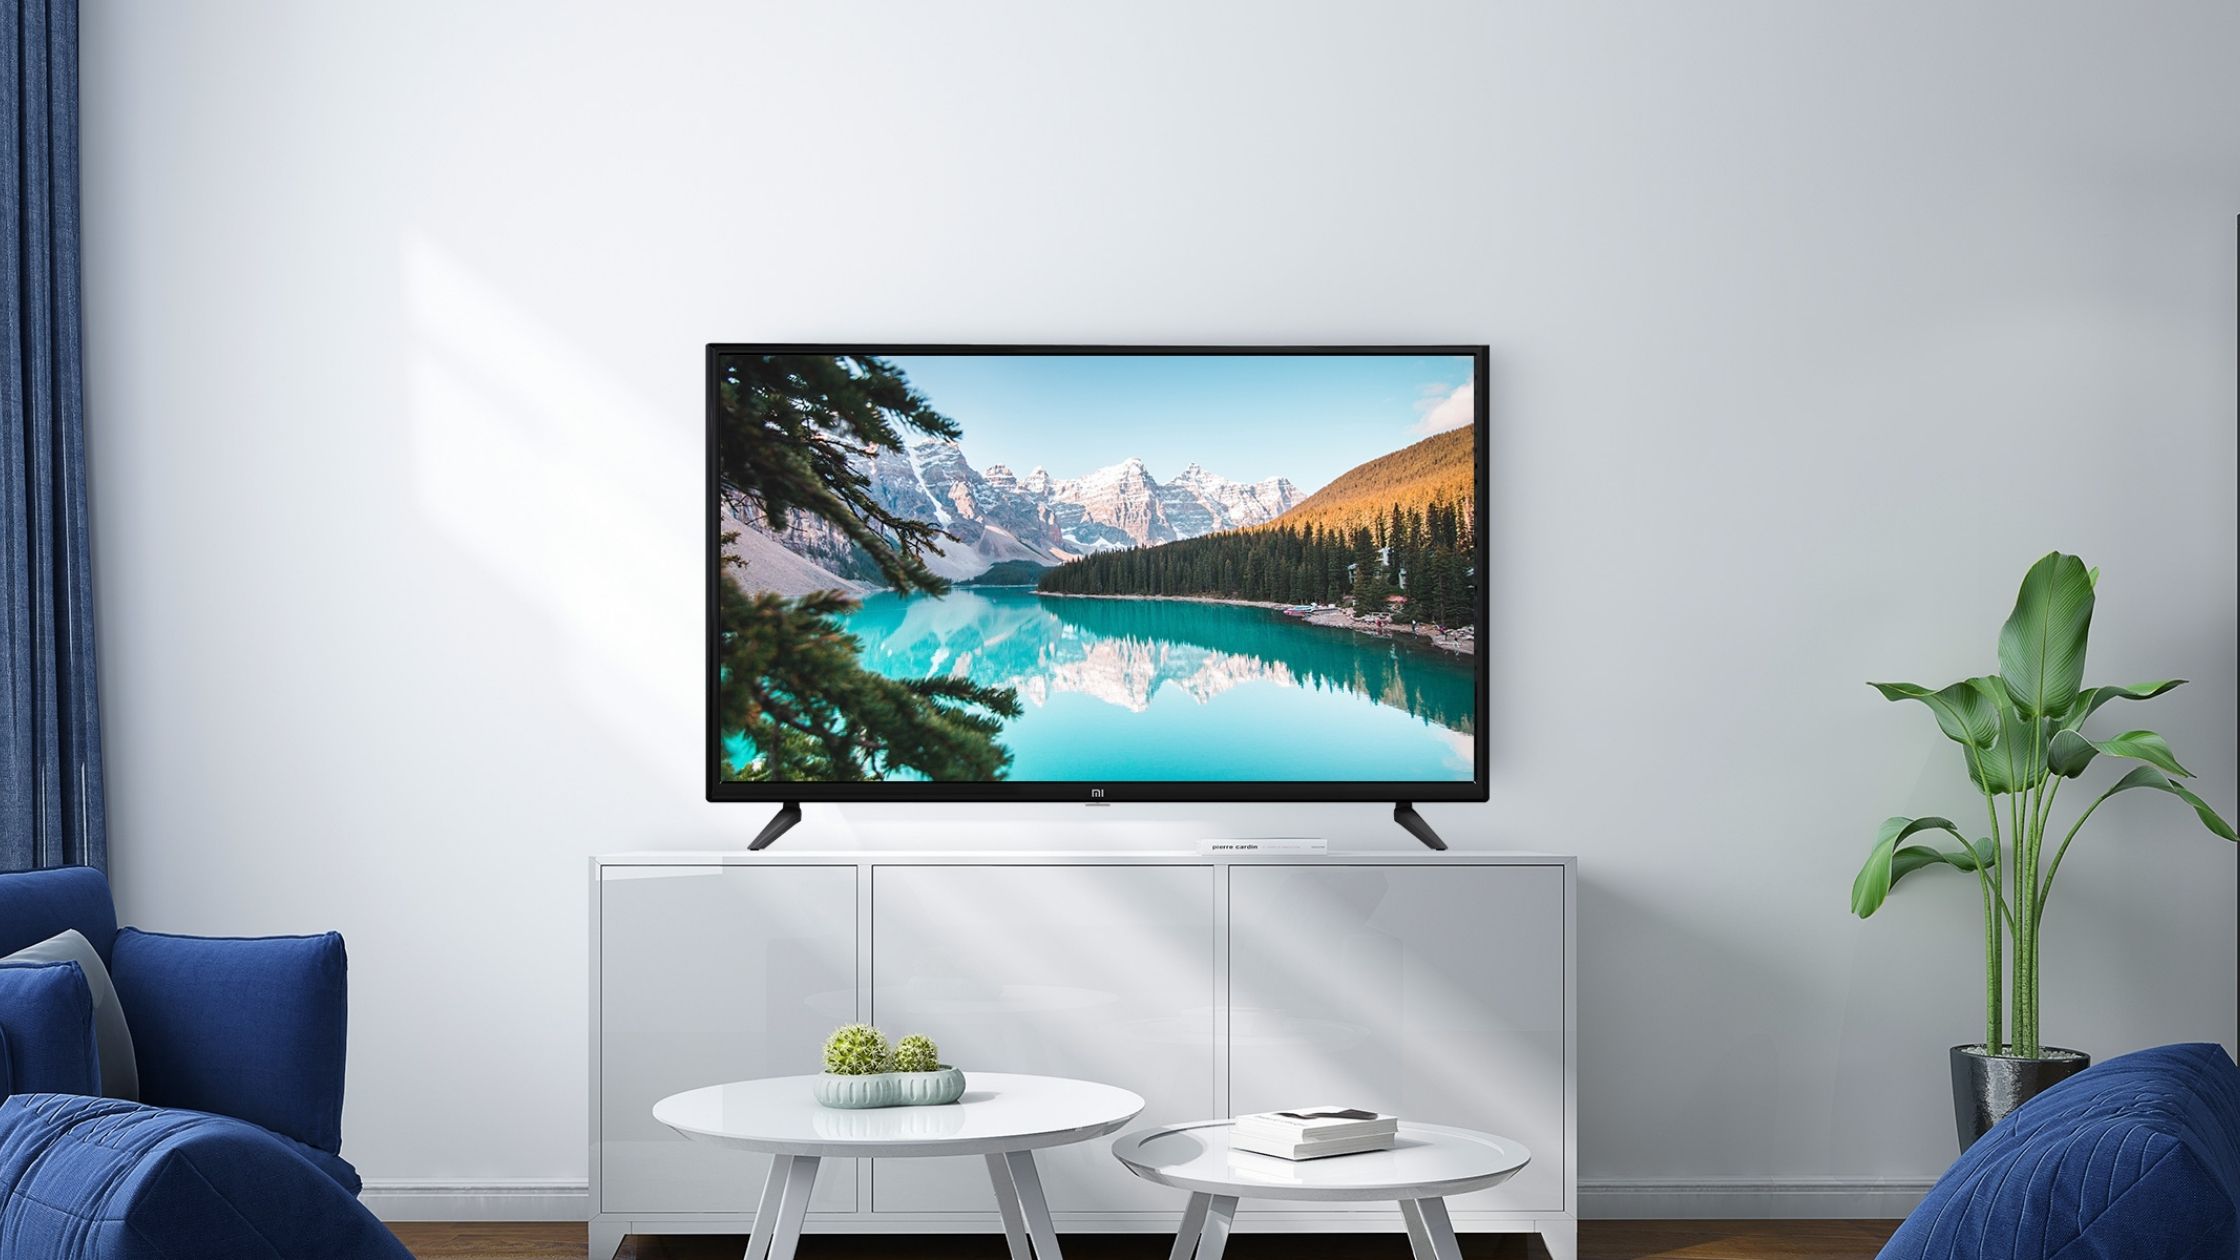 What Is The Smallest Size Smart TV Available